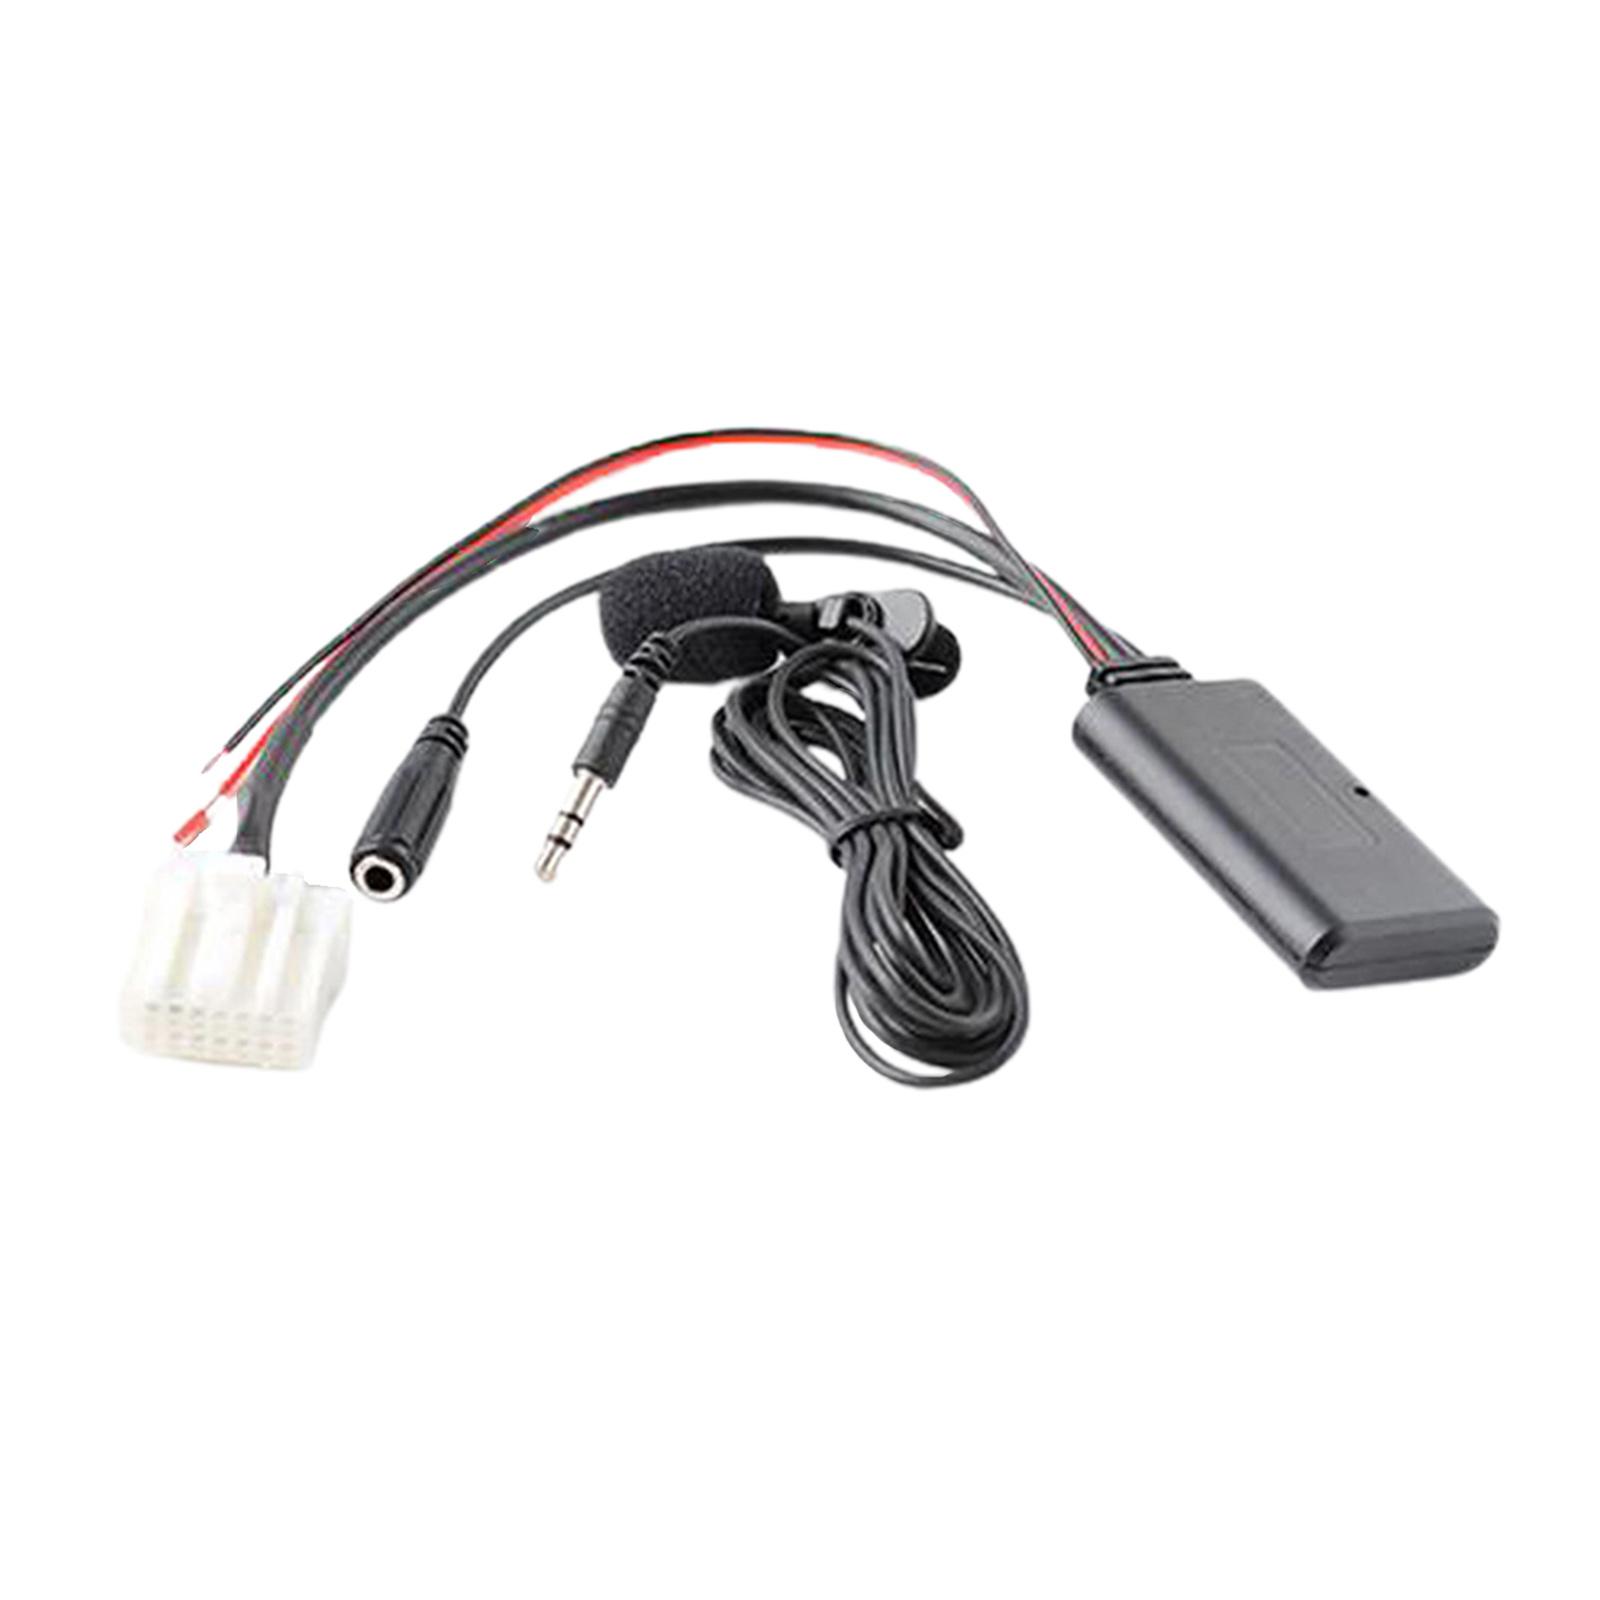 Adapter Accs Kit RCA AUX Cable Car Audio for Mazda 2 3 5 6 MX5 RX8